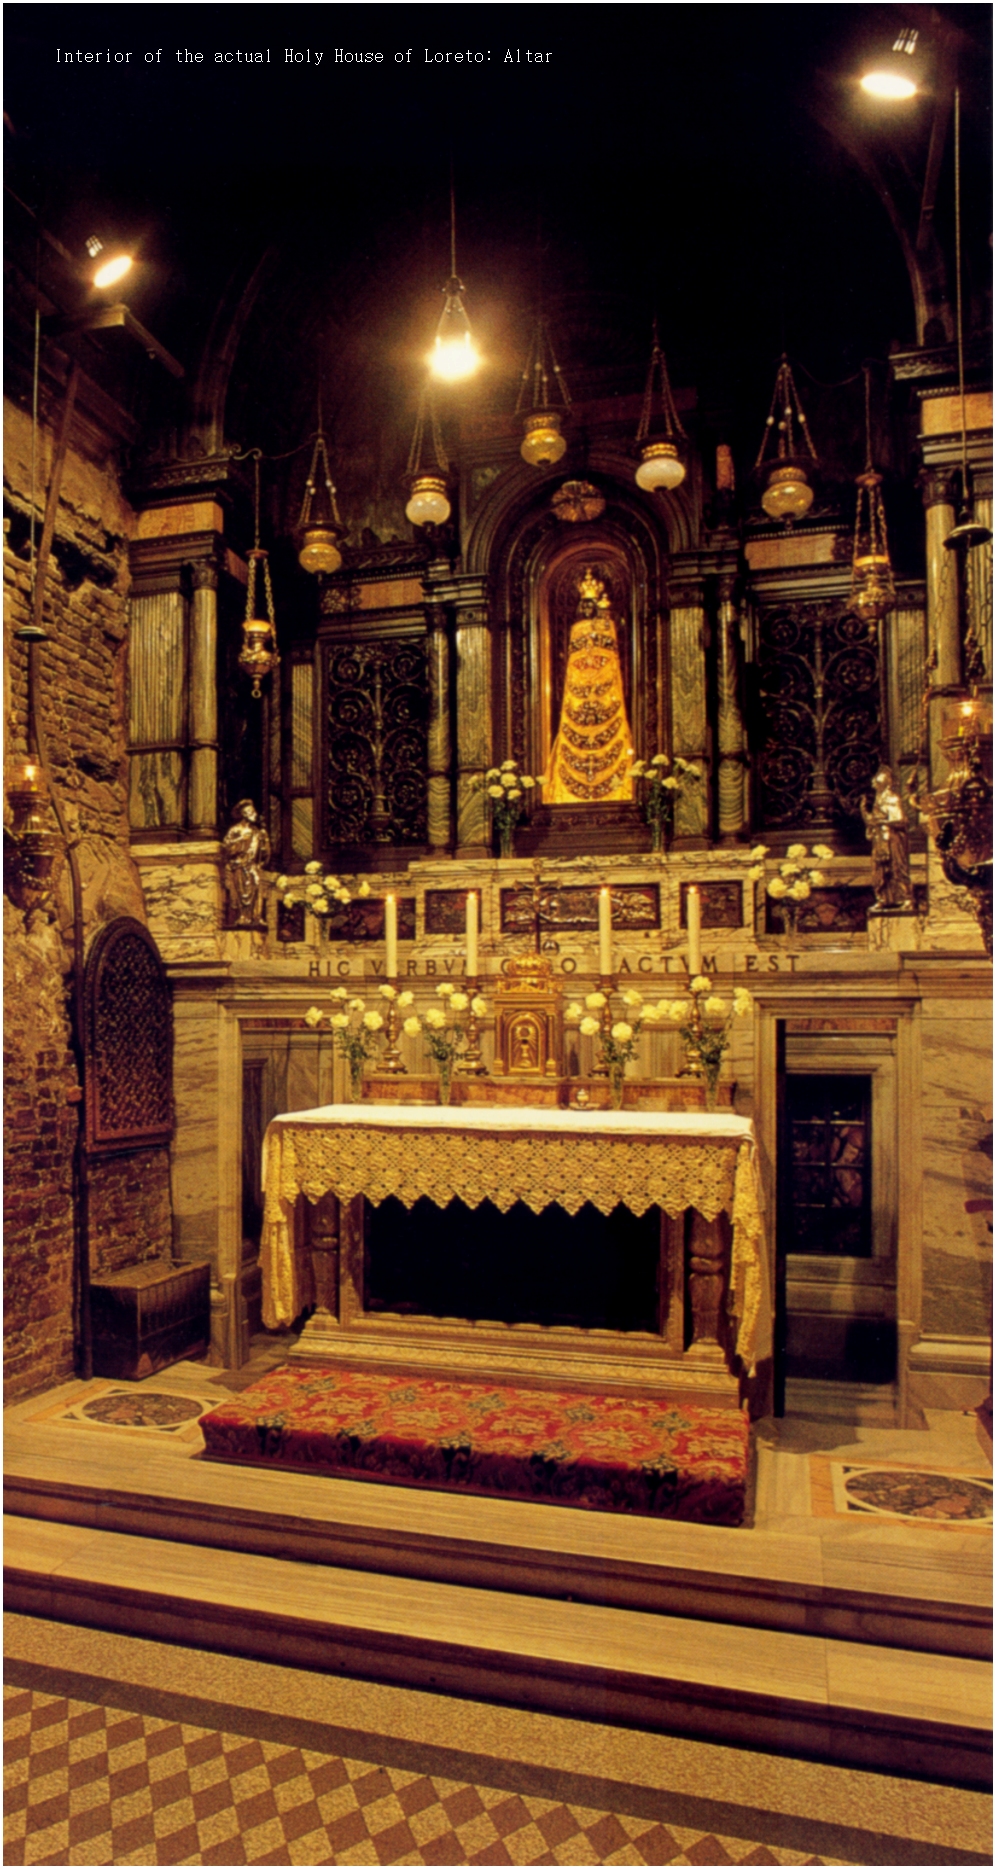 VIEW OF THE ALTAR